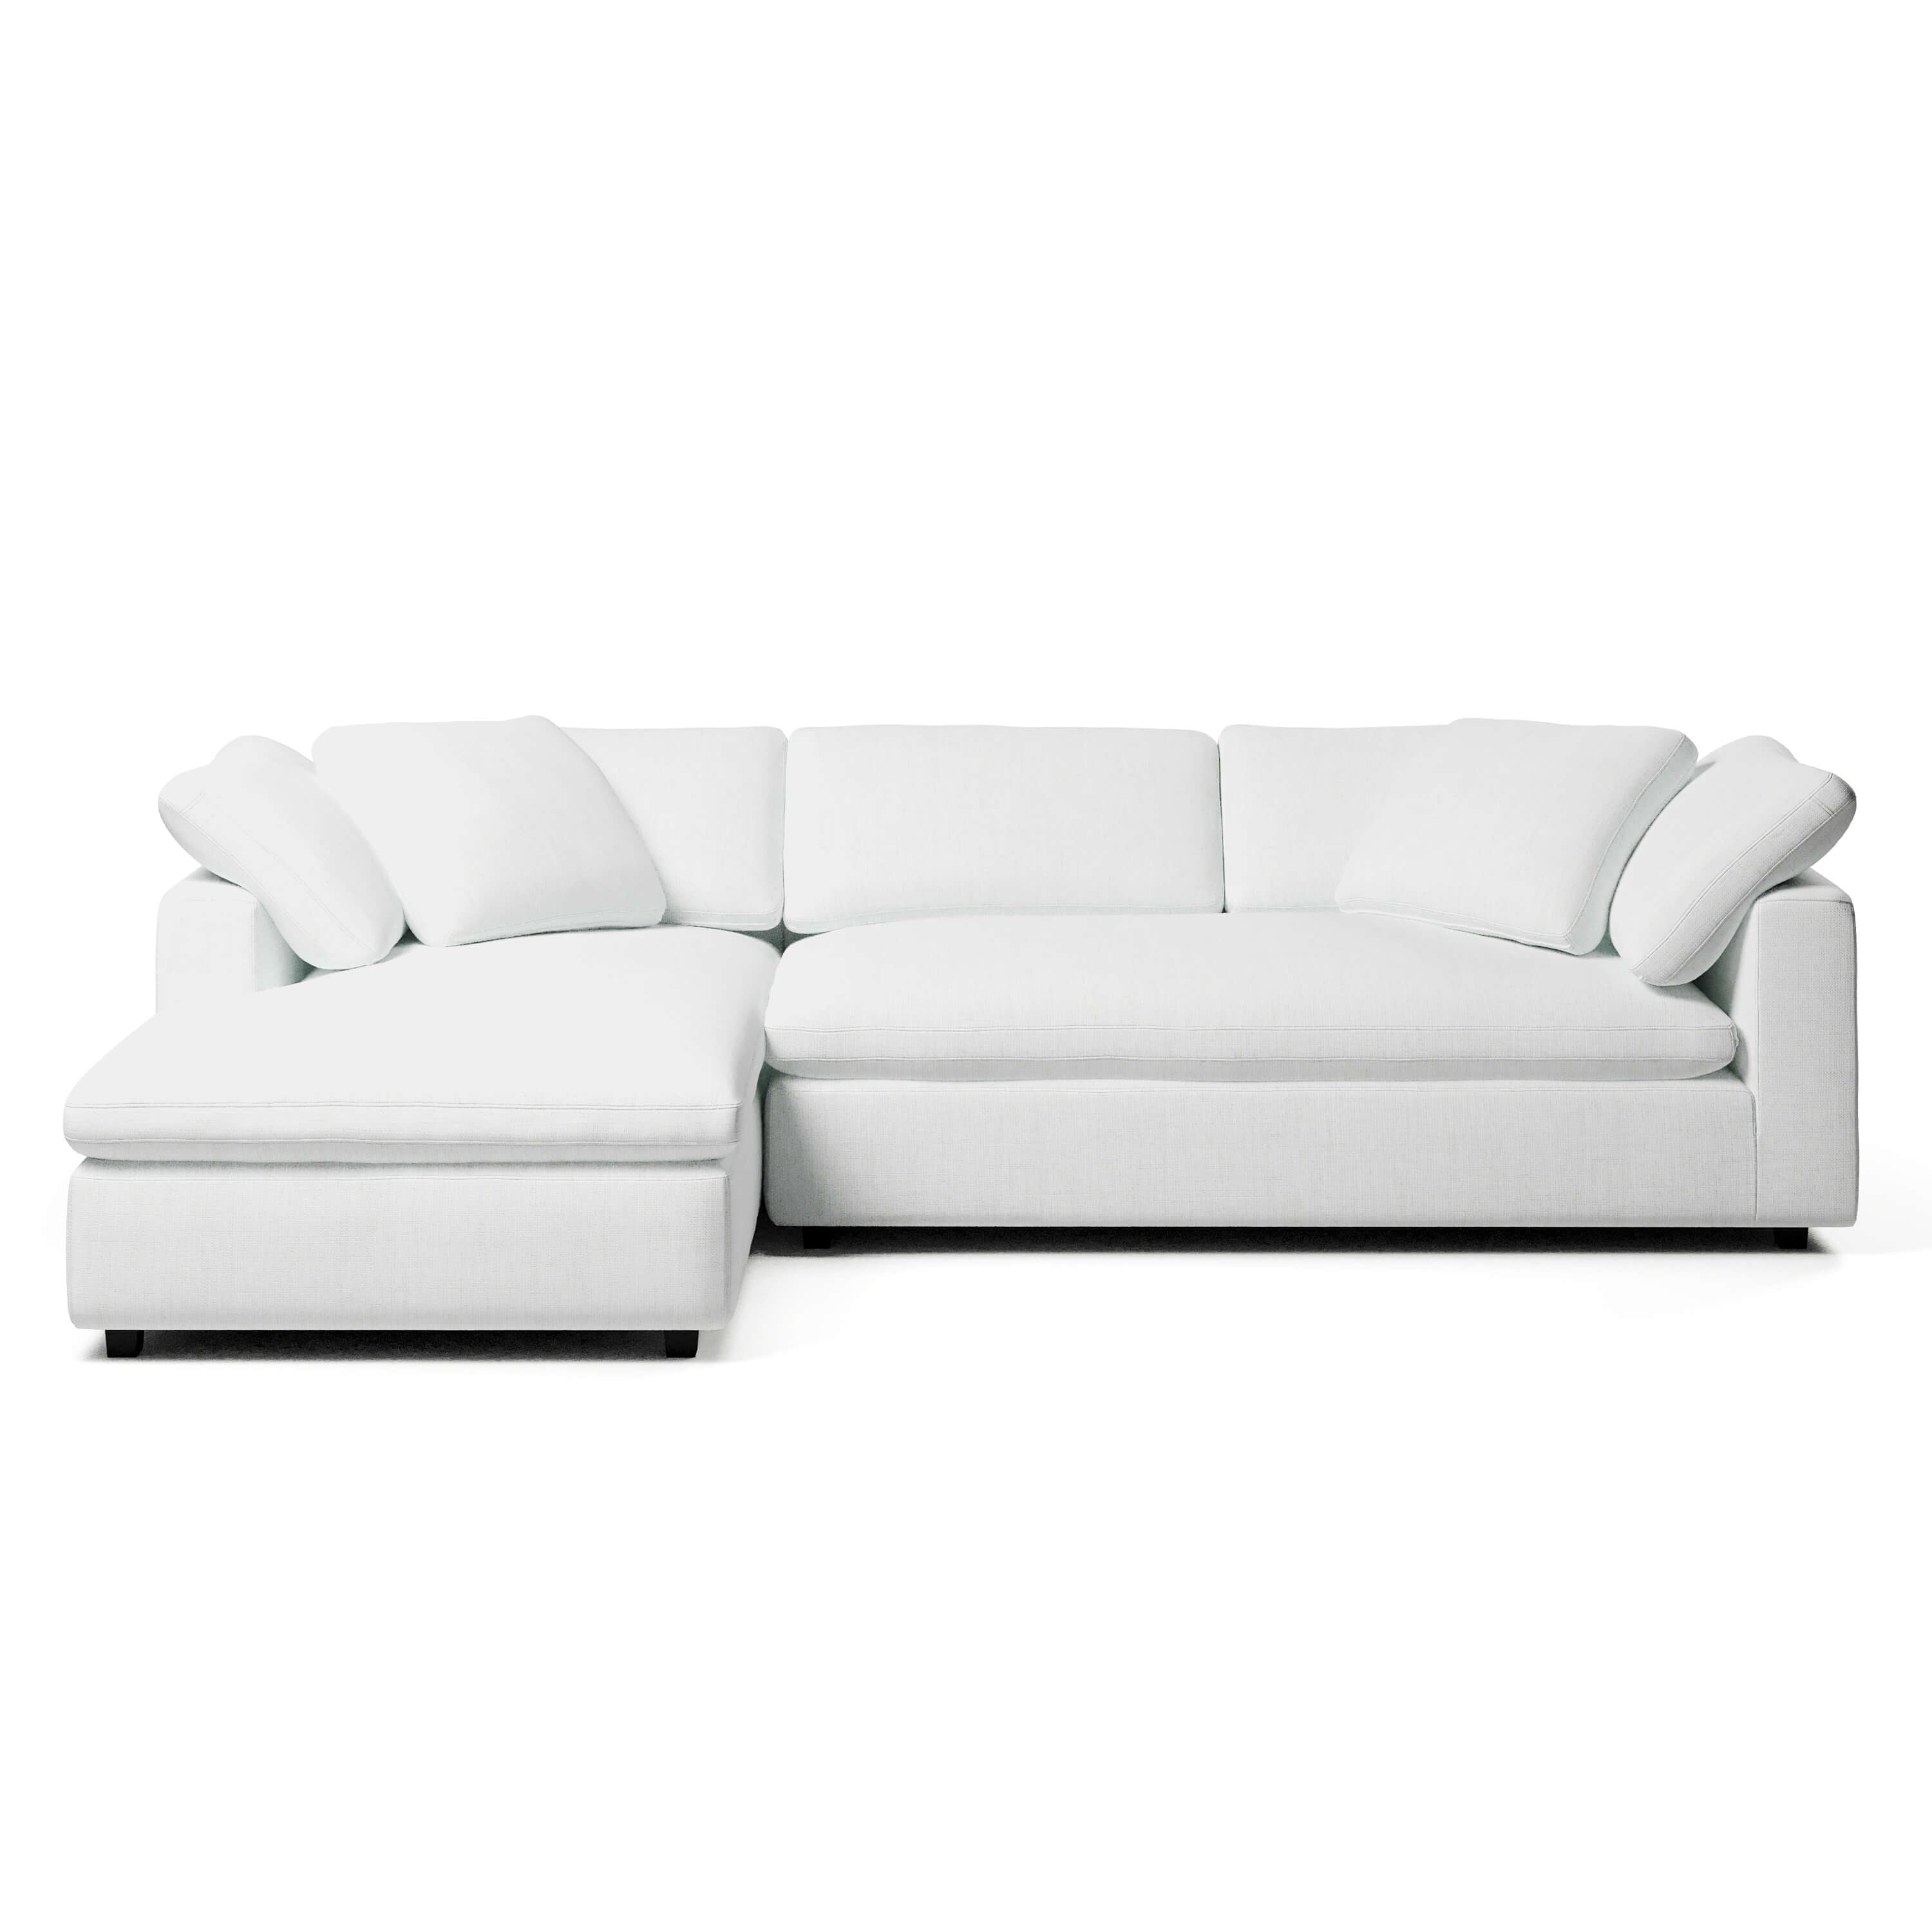 Comfy Modular Sofa - 3-Seater Left-Arm Chaise Bench-Seat